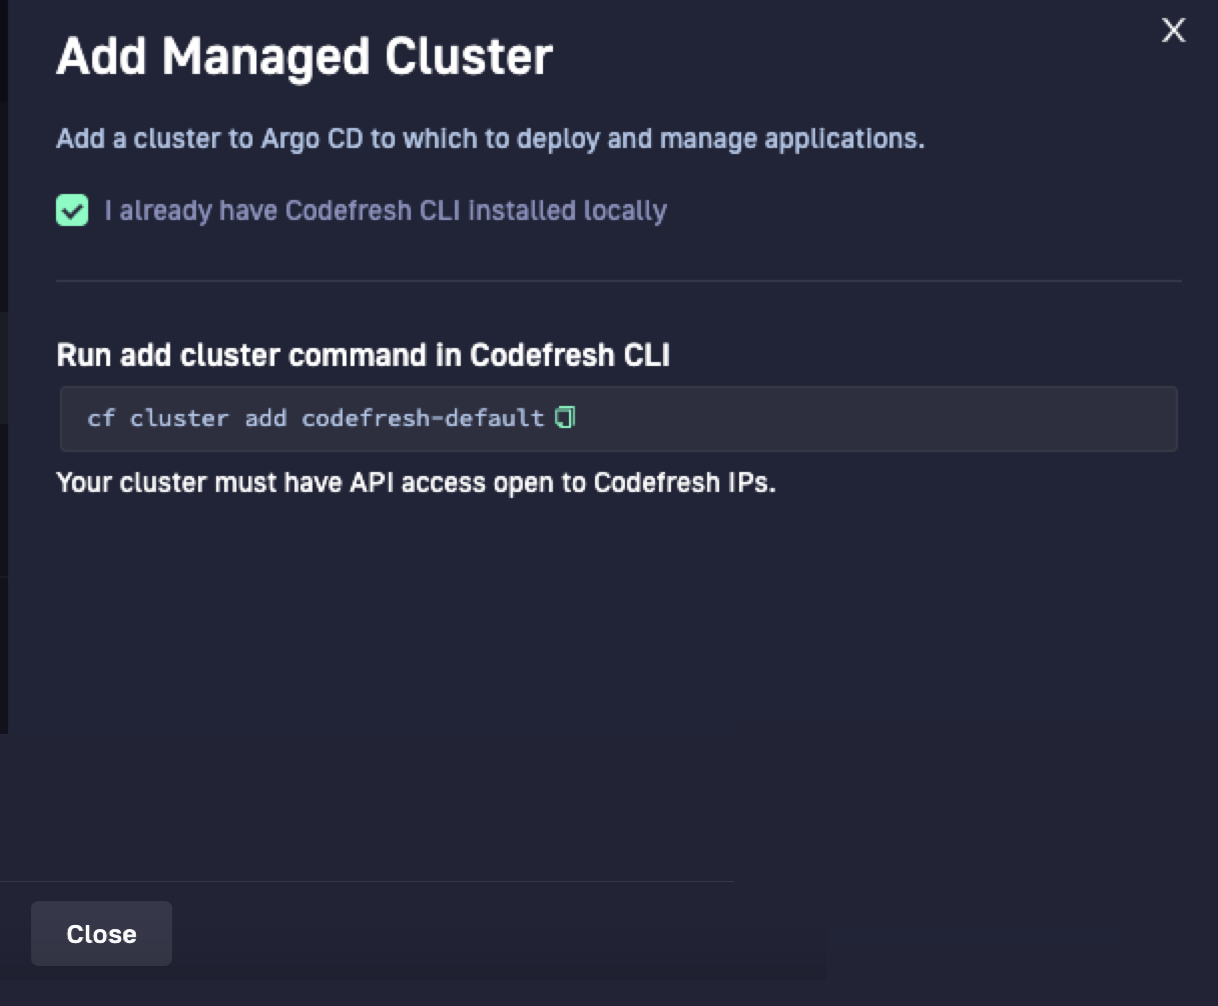 Add Managed Cluster panel